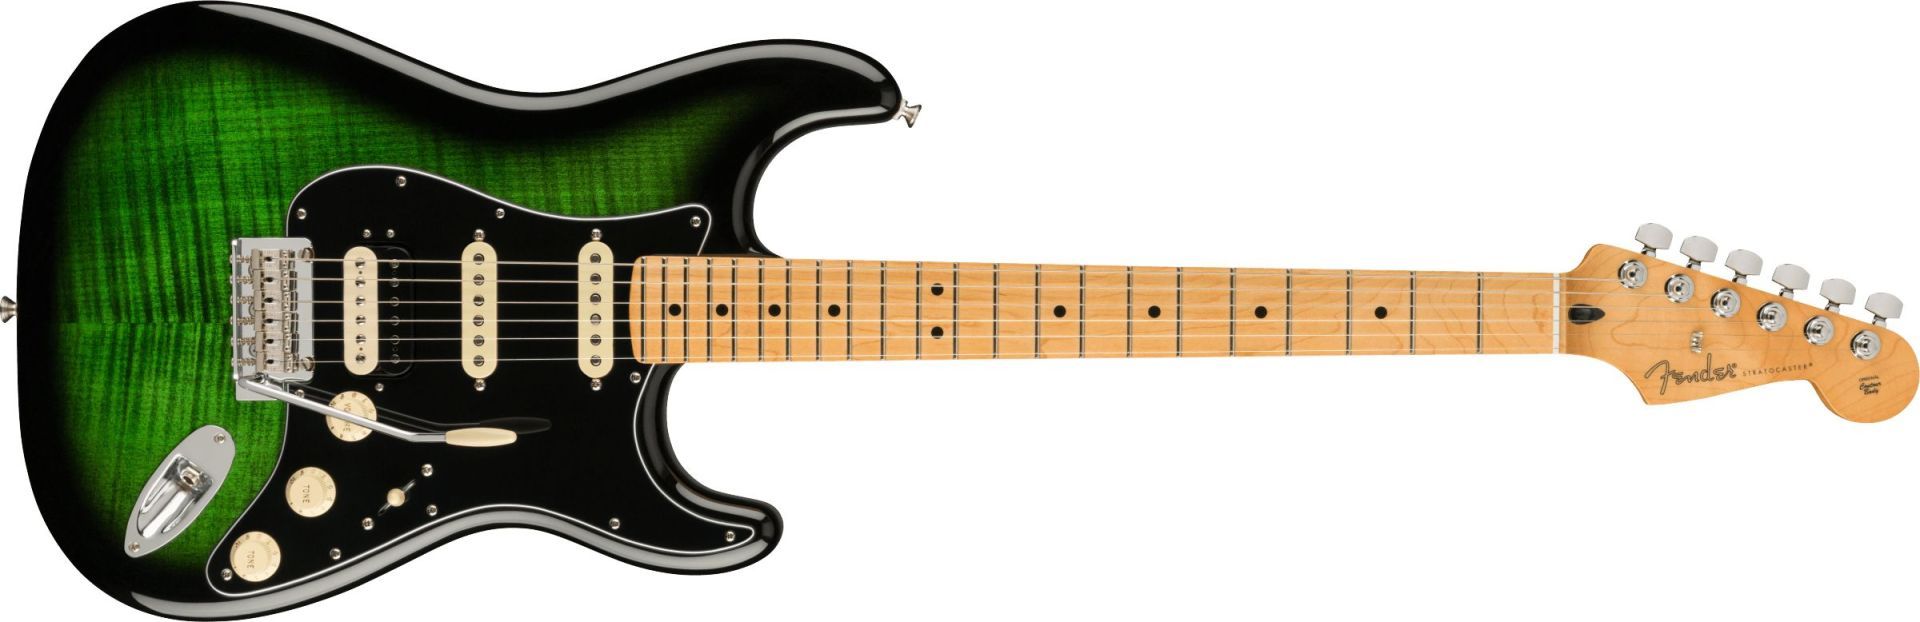 Fender Limited Edition Player Stratocaster HSS Plus Top Maple Fingerboard Green Burst